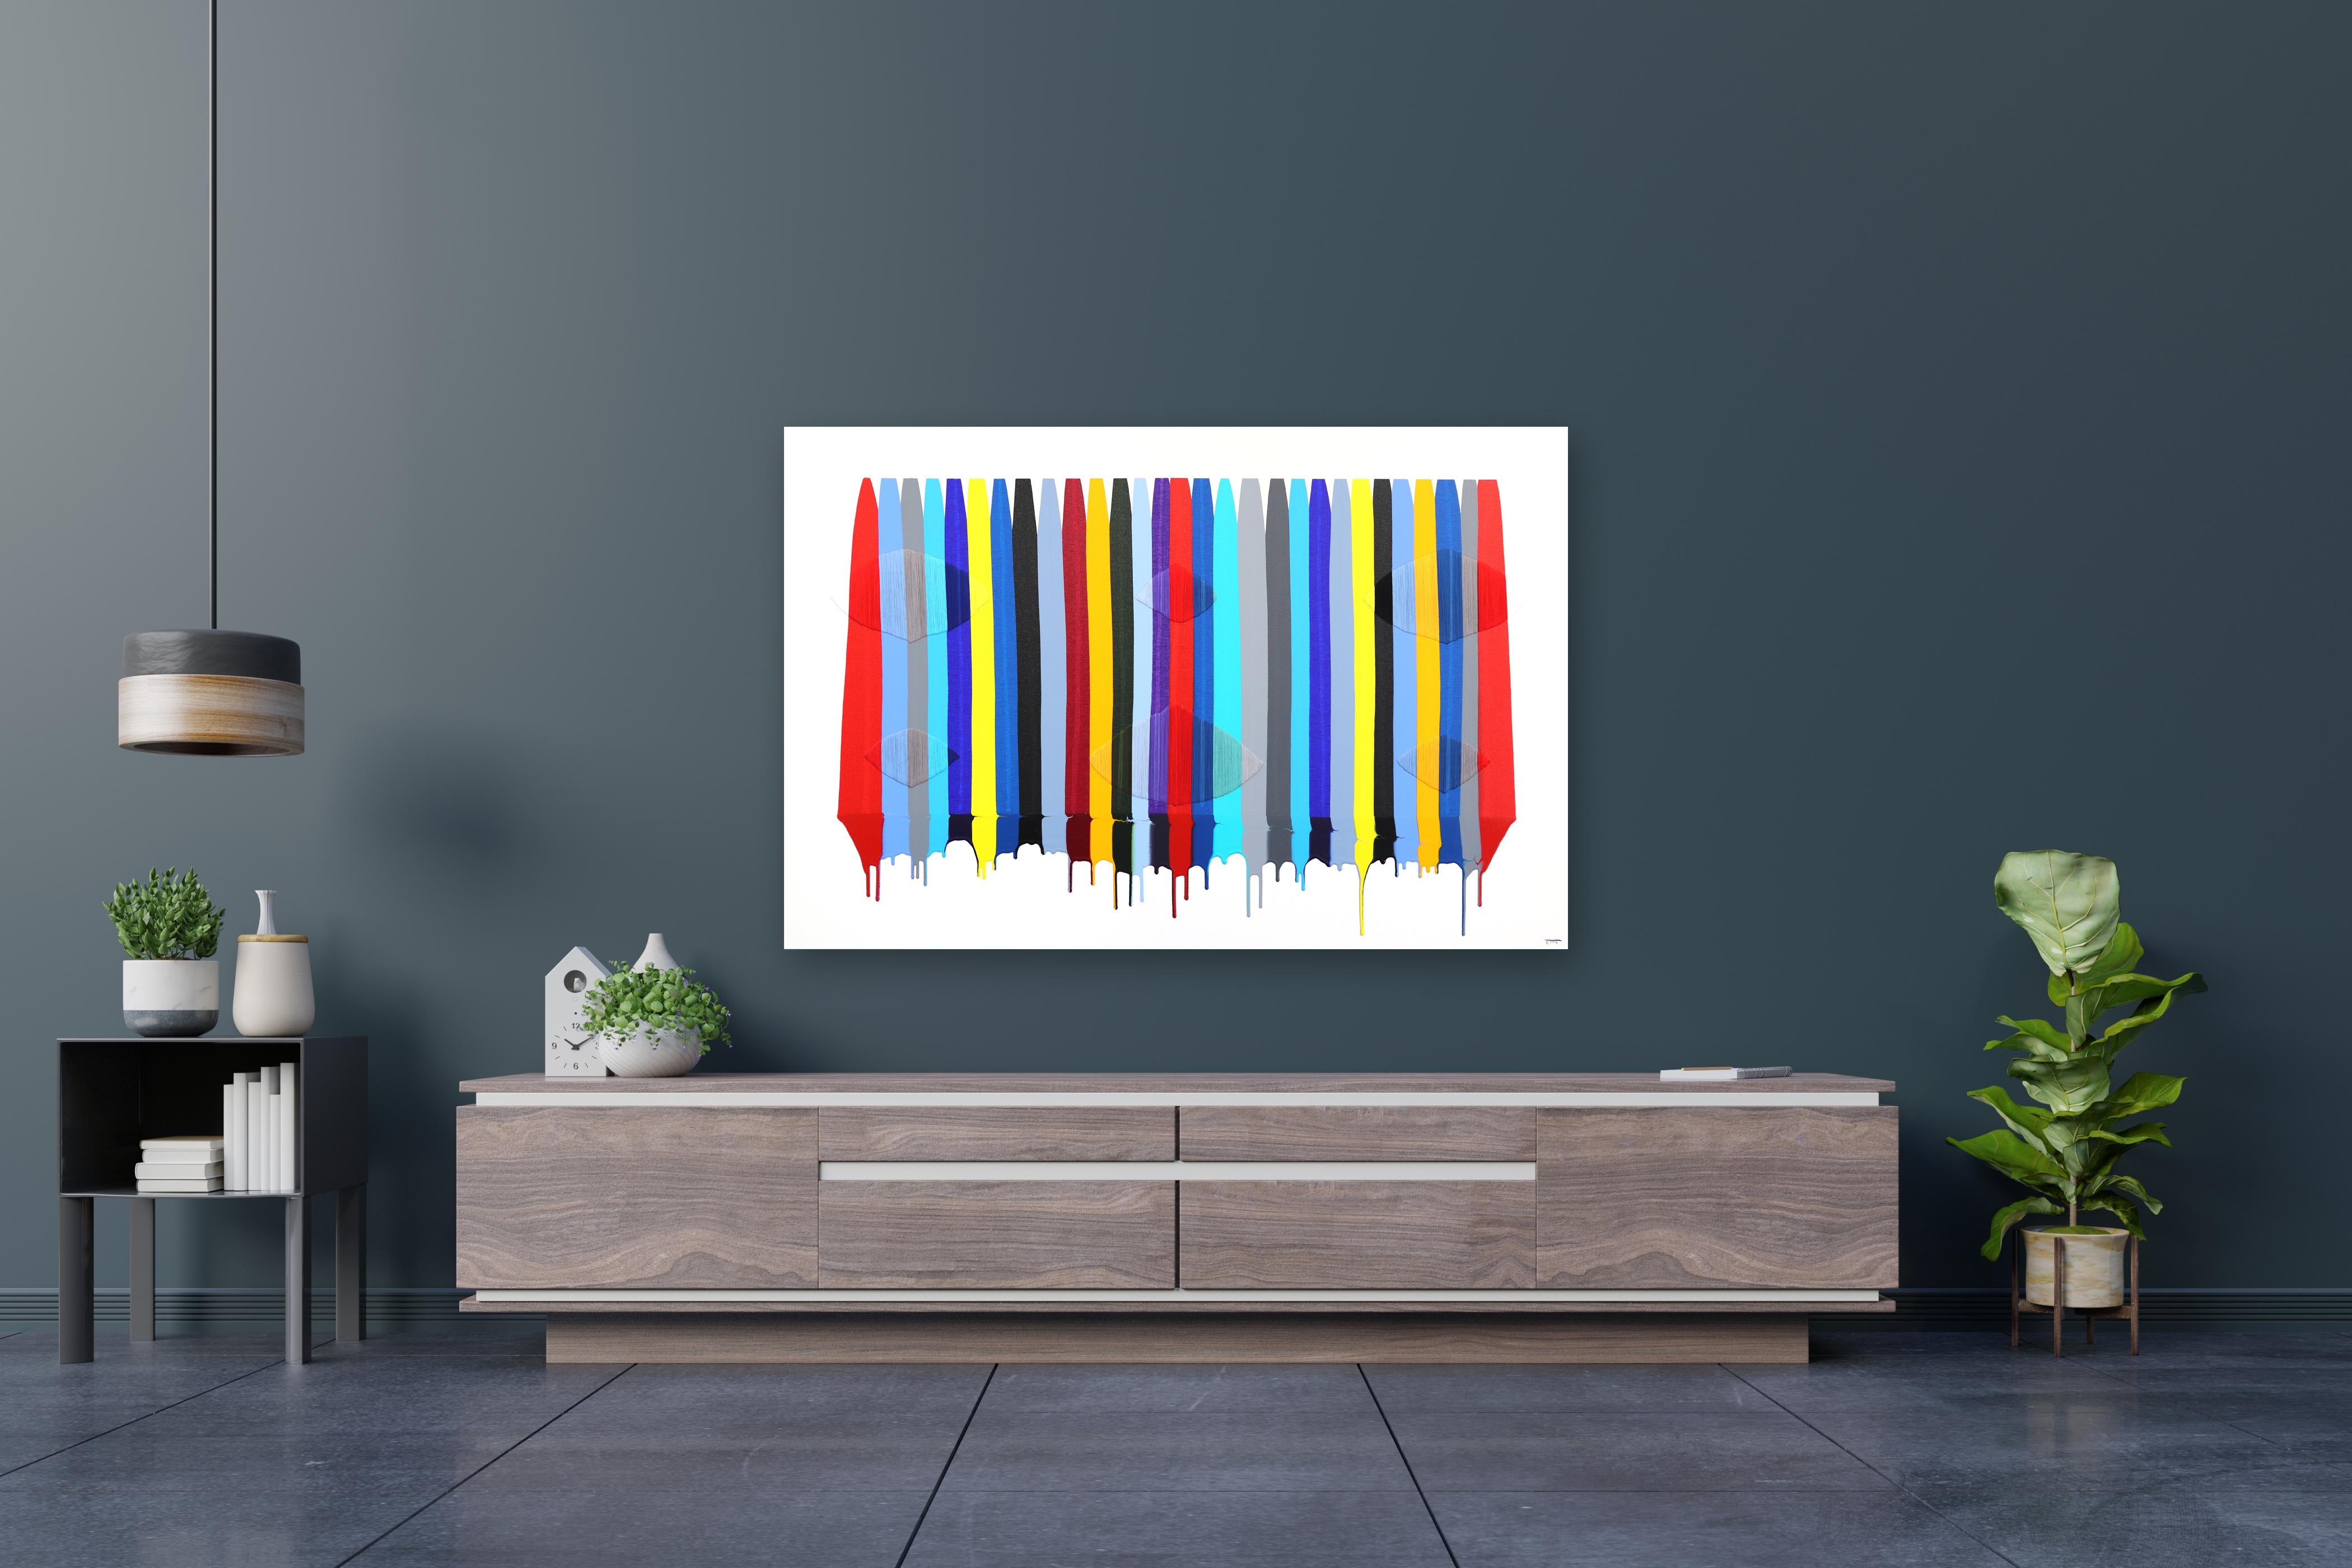 Fils I Colors DCLVIII - Mixed Media Embroidery Abstract Modern Painting - Contemporary Mixed Media Art by Raul de la Torre